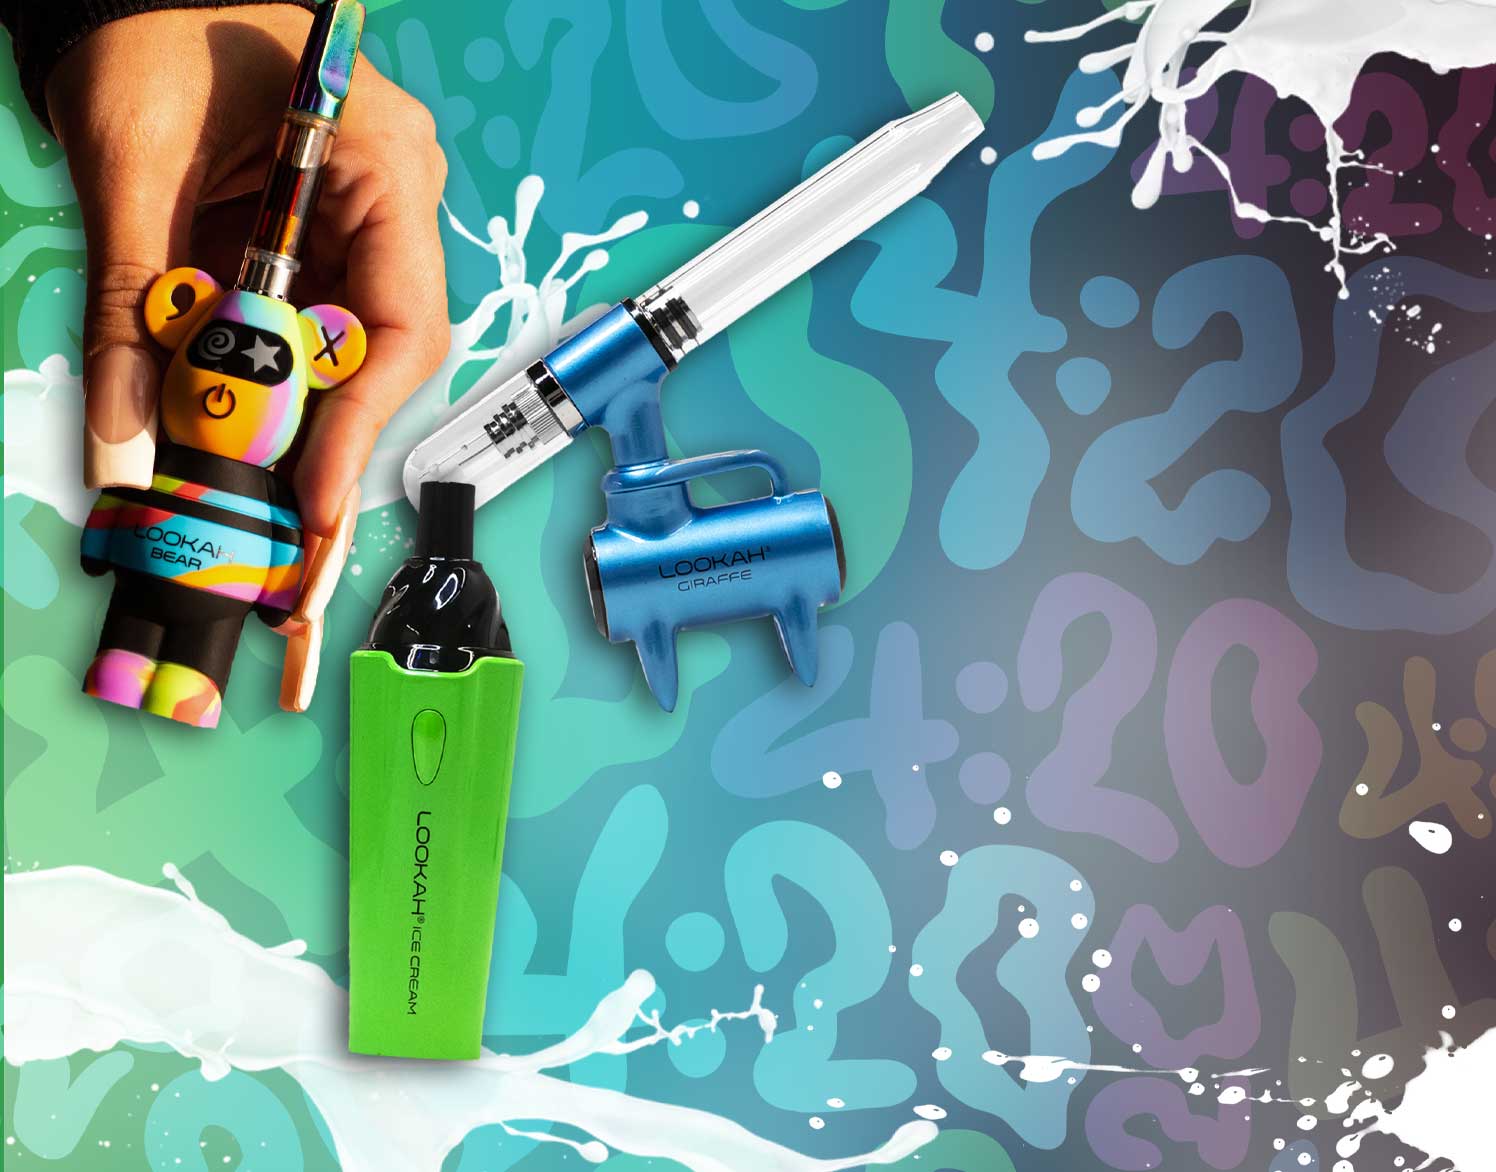 Lookah products on 4/20 background with splatter effects